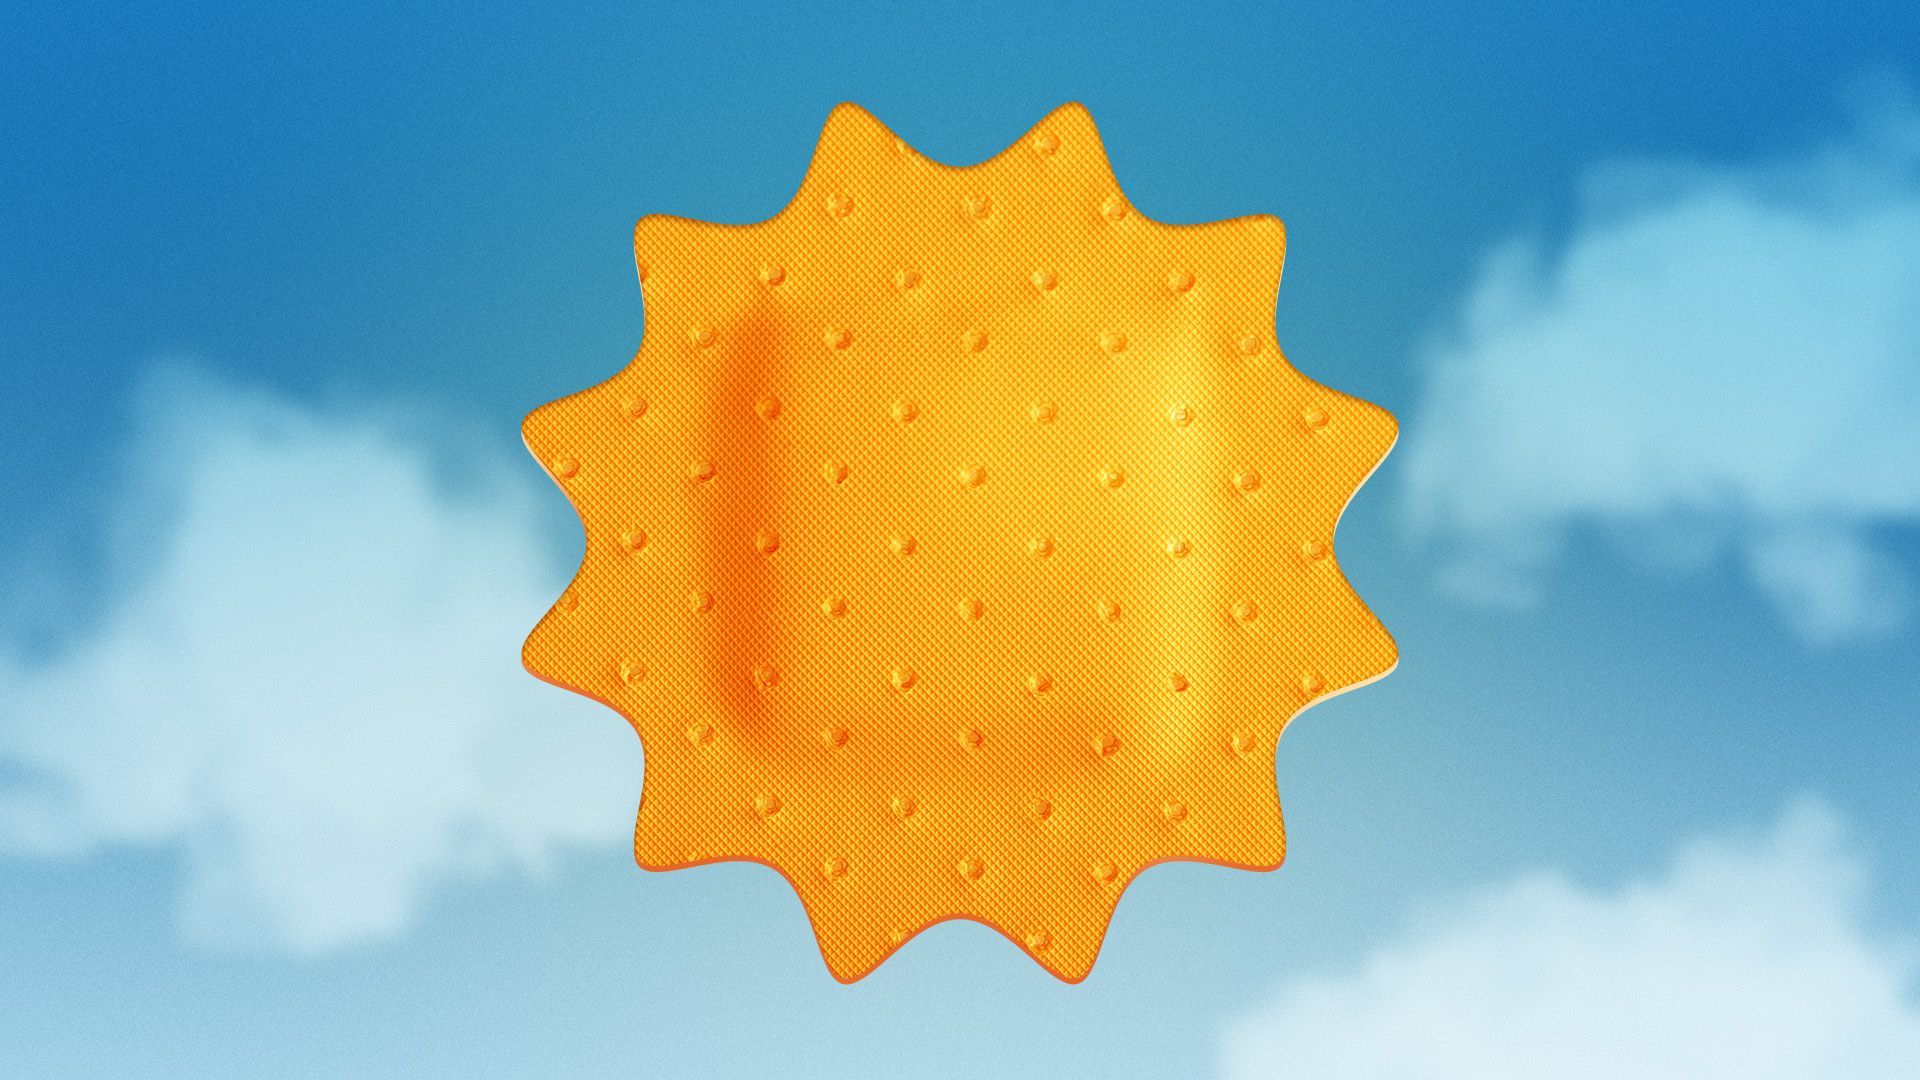 Illustration of the sun in the shape of a band-aid